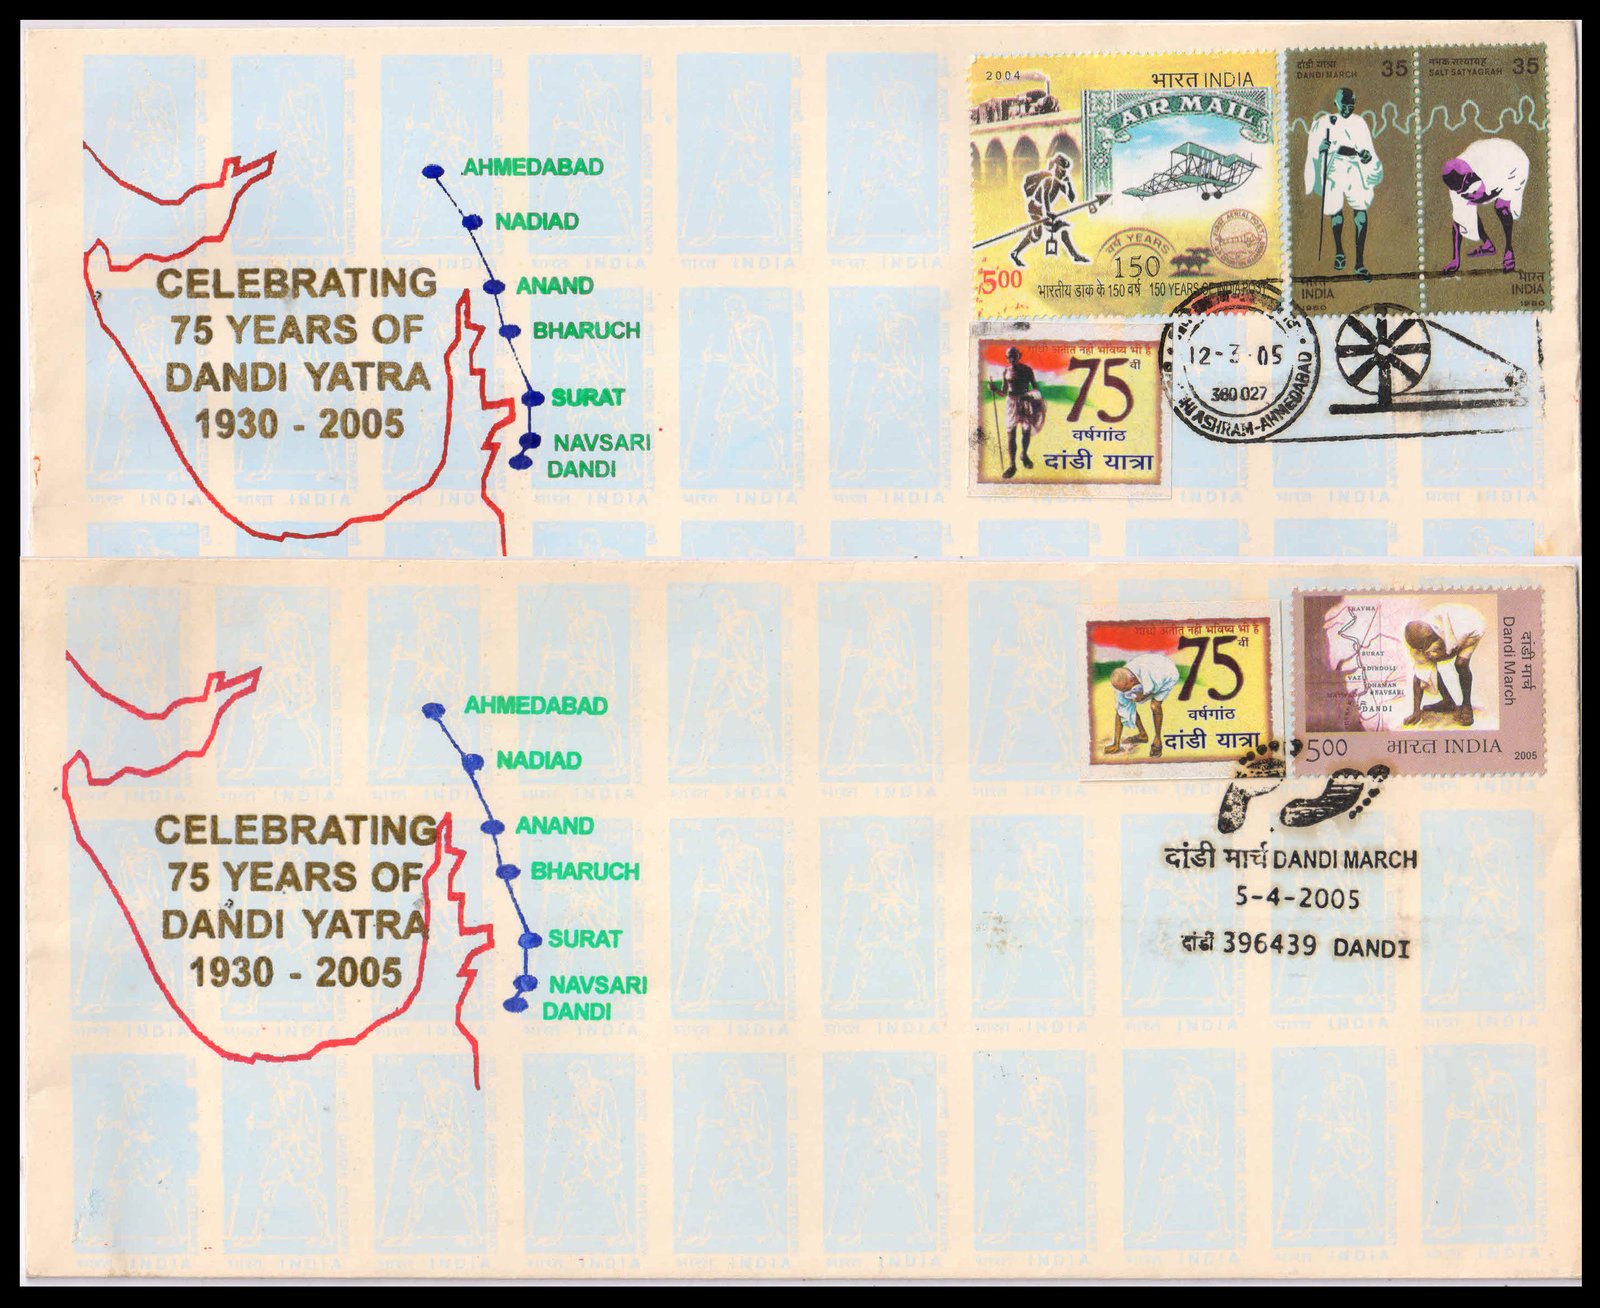 INDIA 2005, Dandi Yatra Special Cover on Mahatma Gandhi, Set of 2 Covers, Dated 12-3-2005